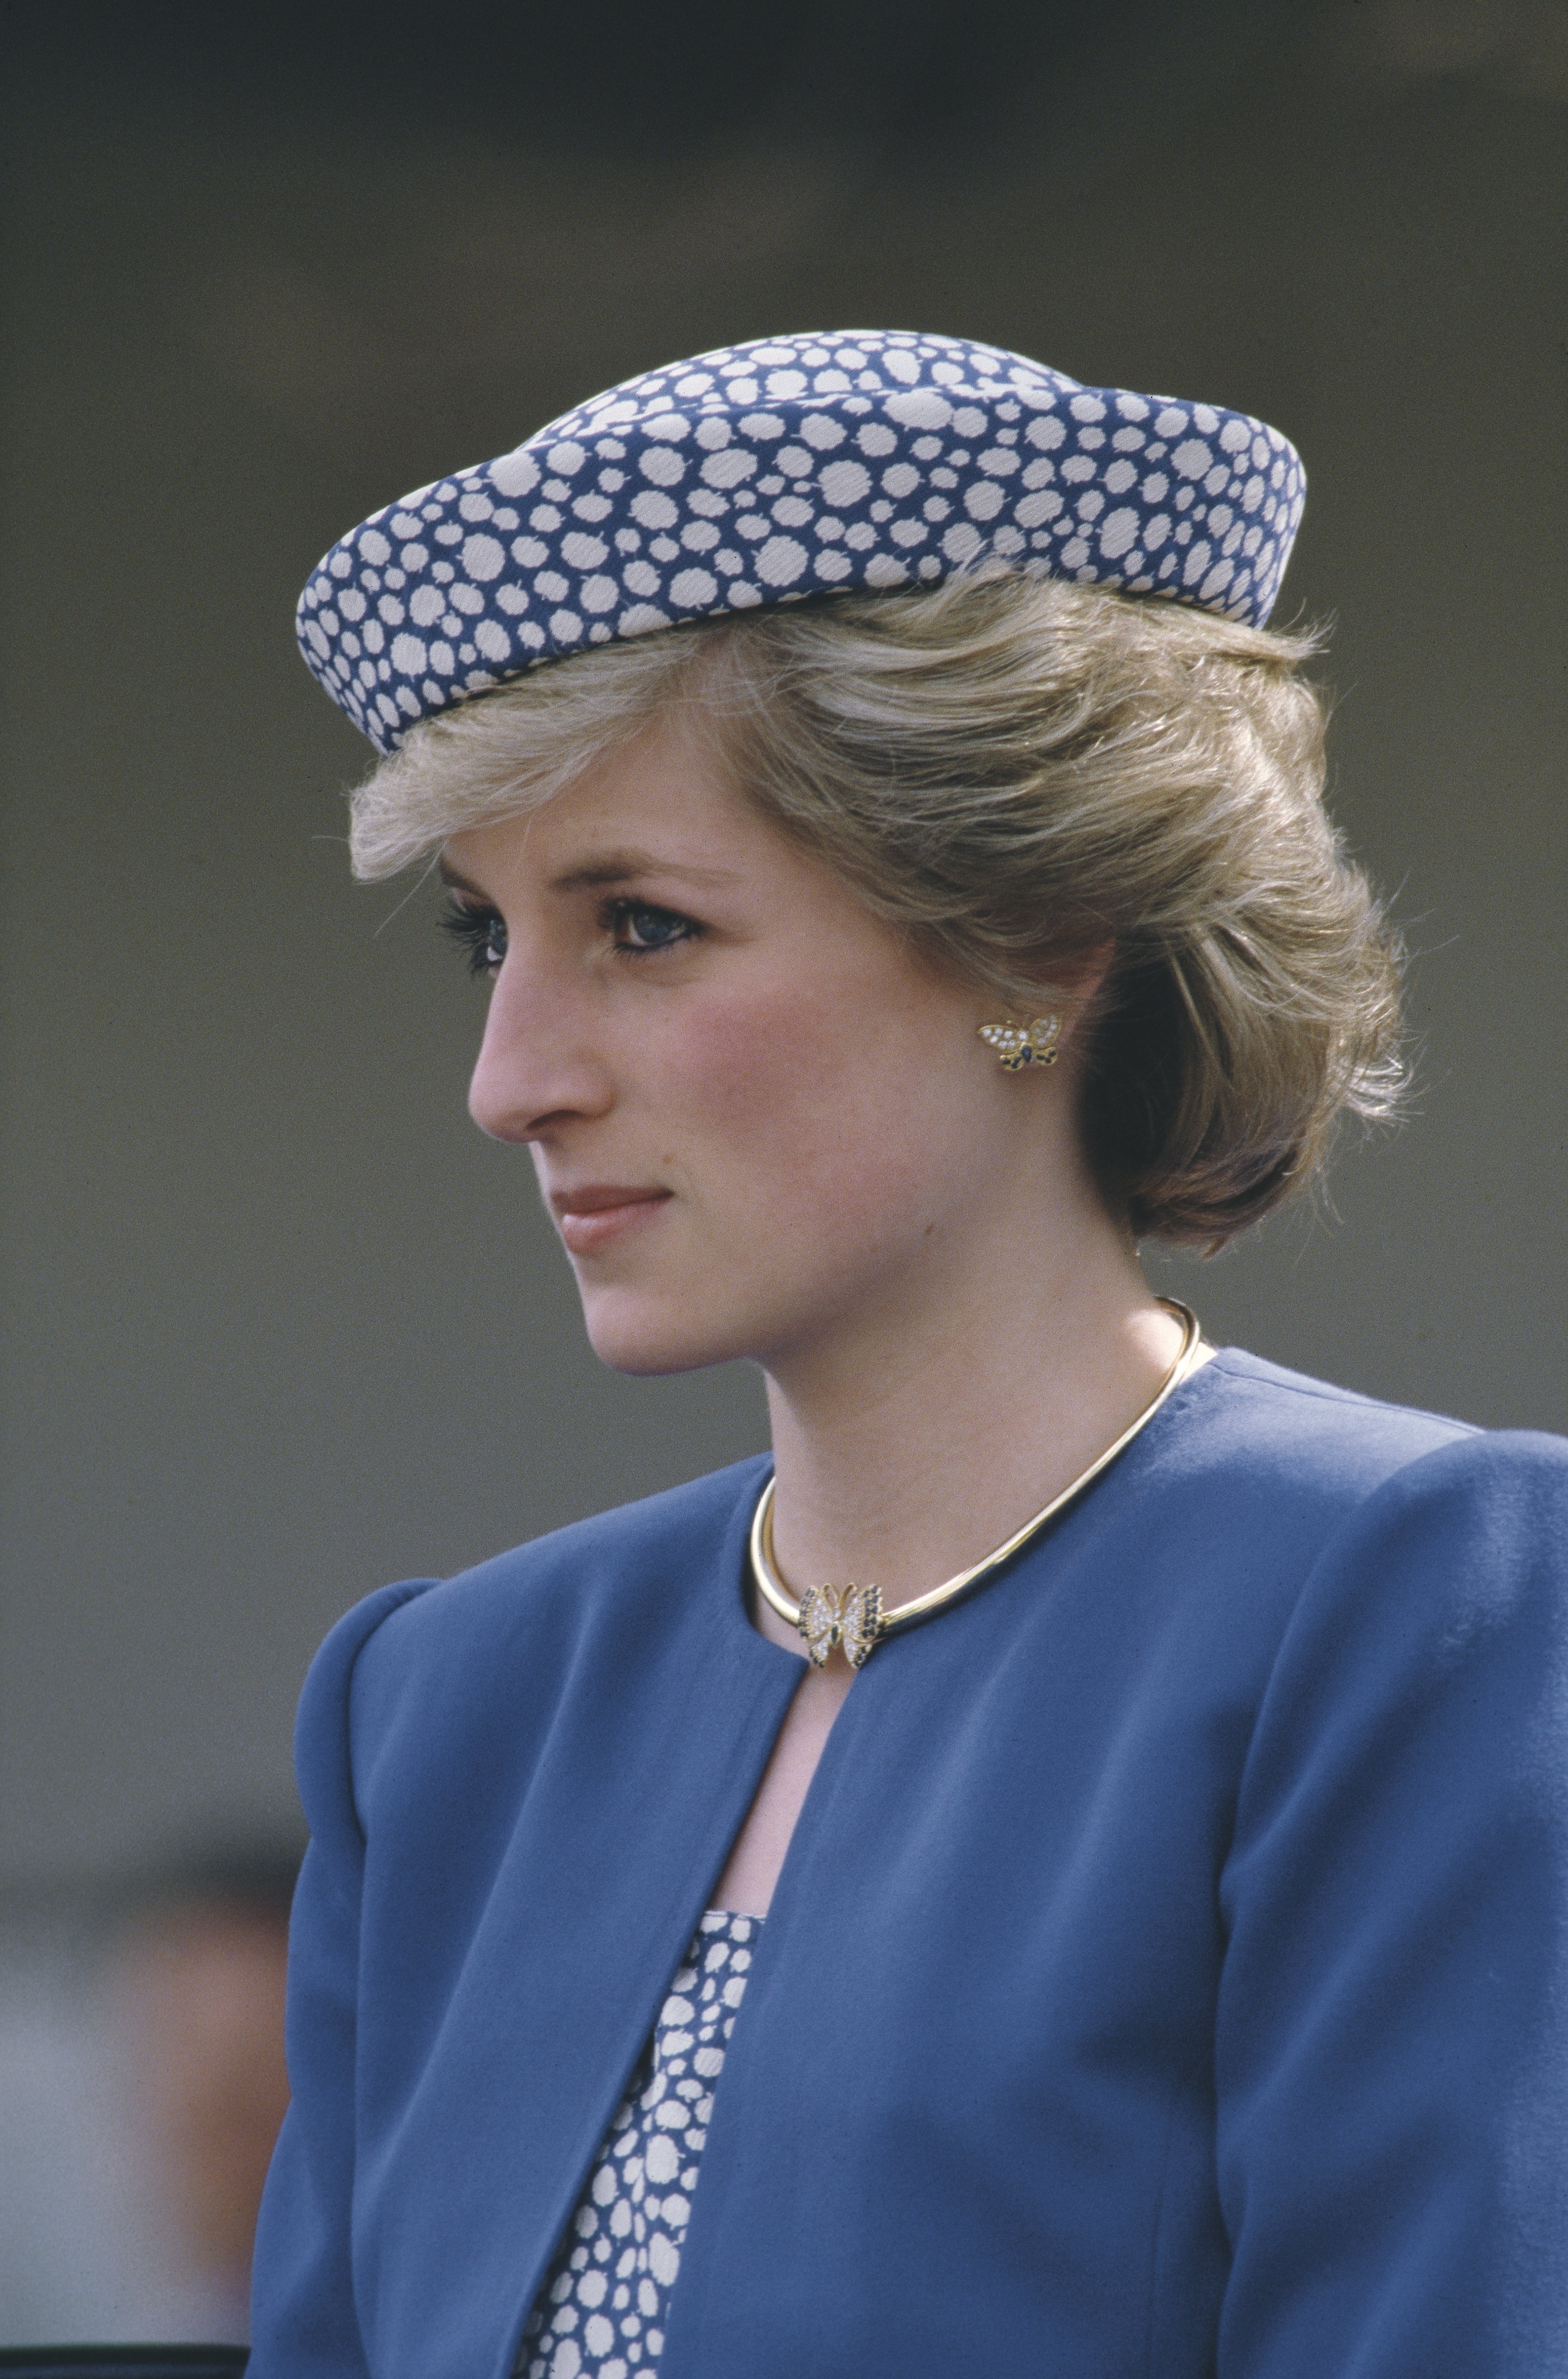 Princess Diana in Prince George, British Columbia, during a visit to Canada in May 1986. | Source: Lucy Levenson/Princess Diana Archive/Getty Images